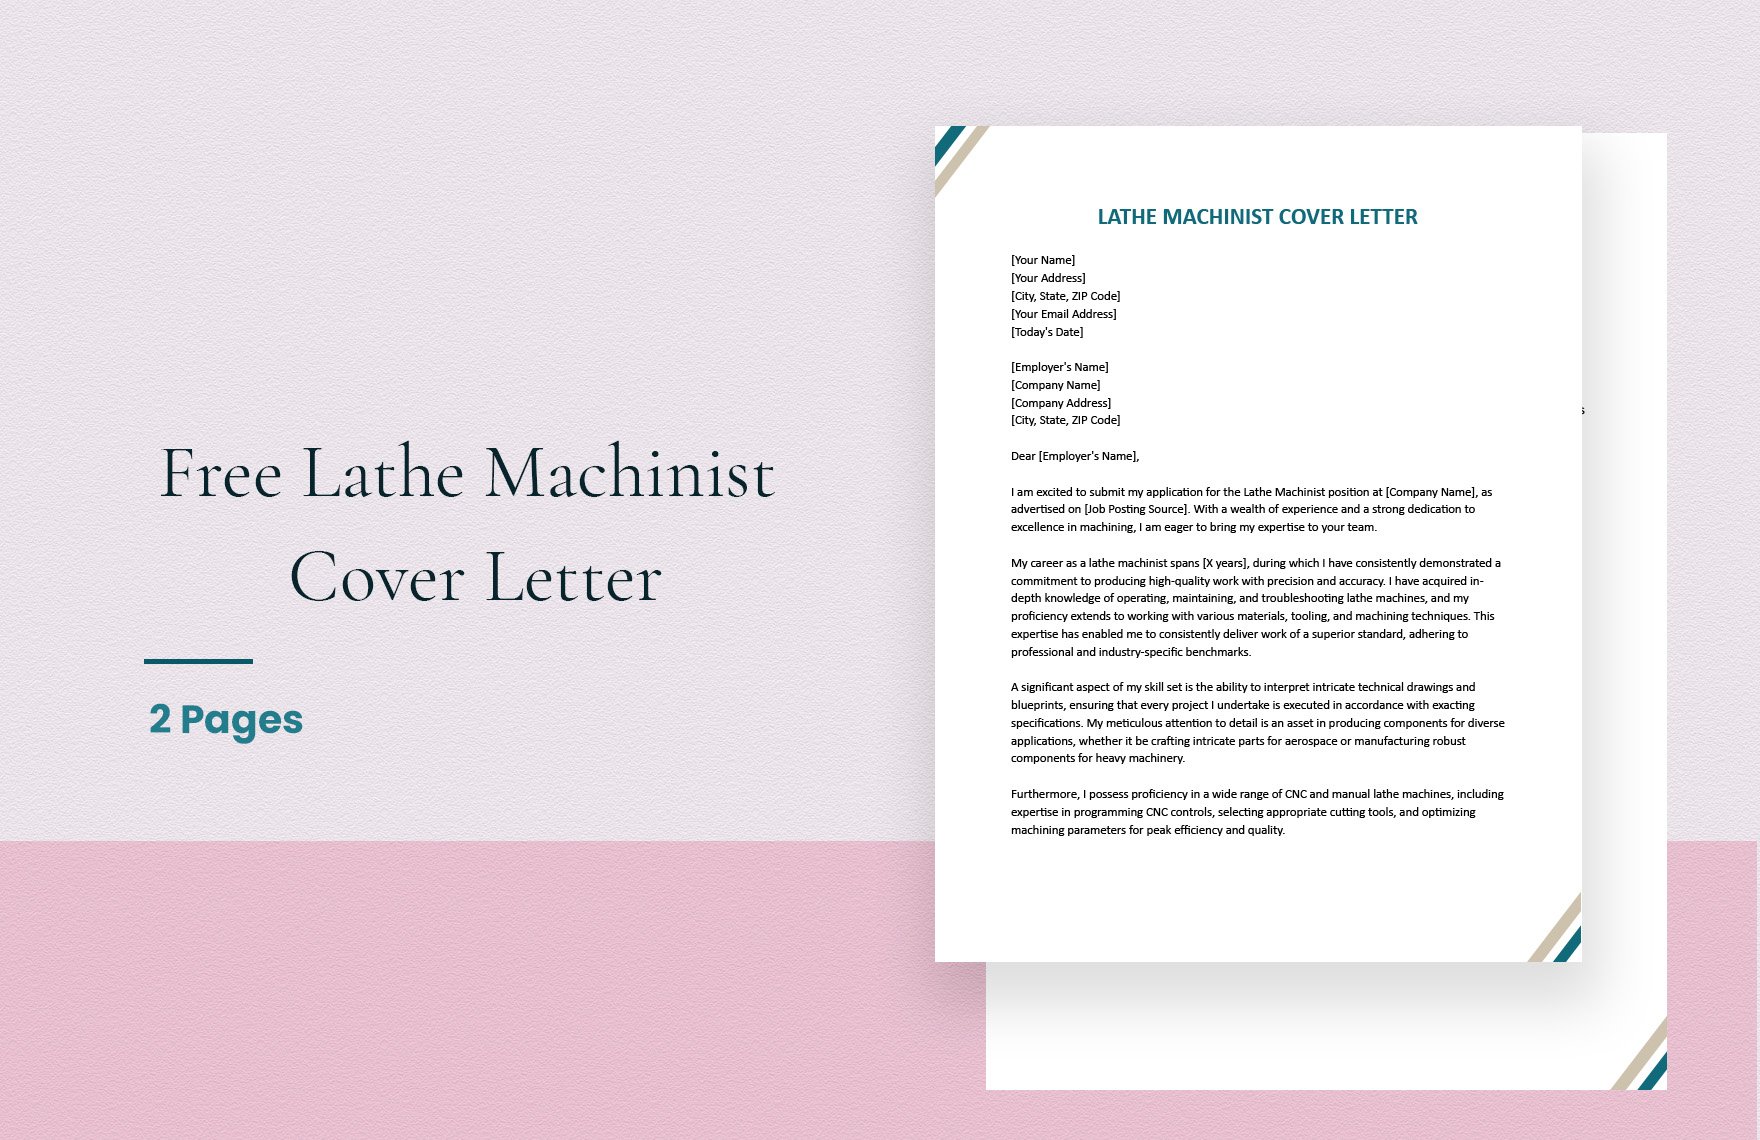 Lathe Machinist Cover Letter in Word, Google Docs